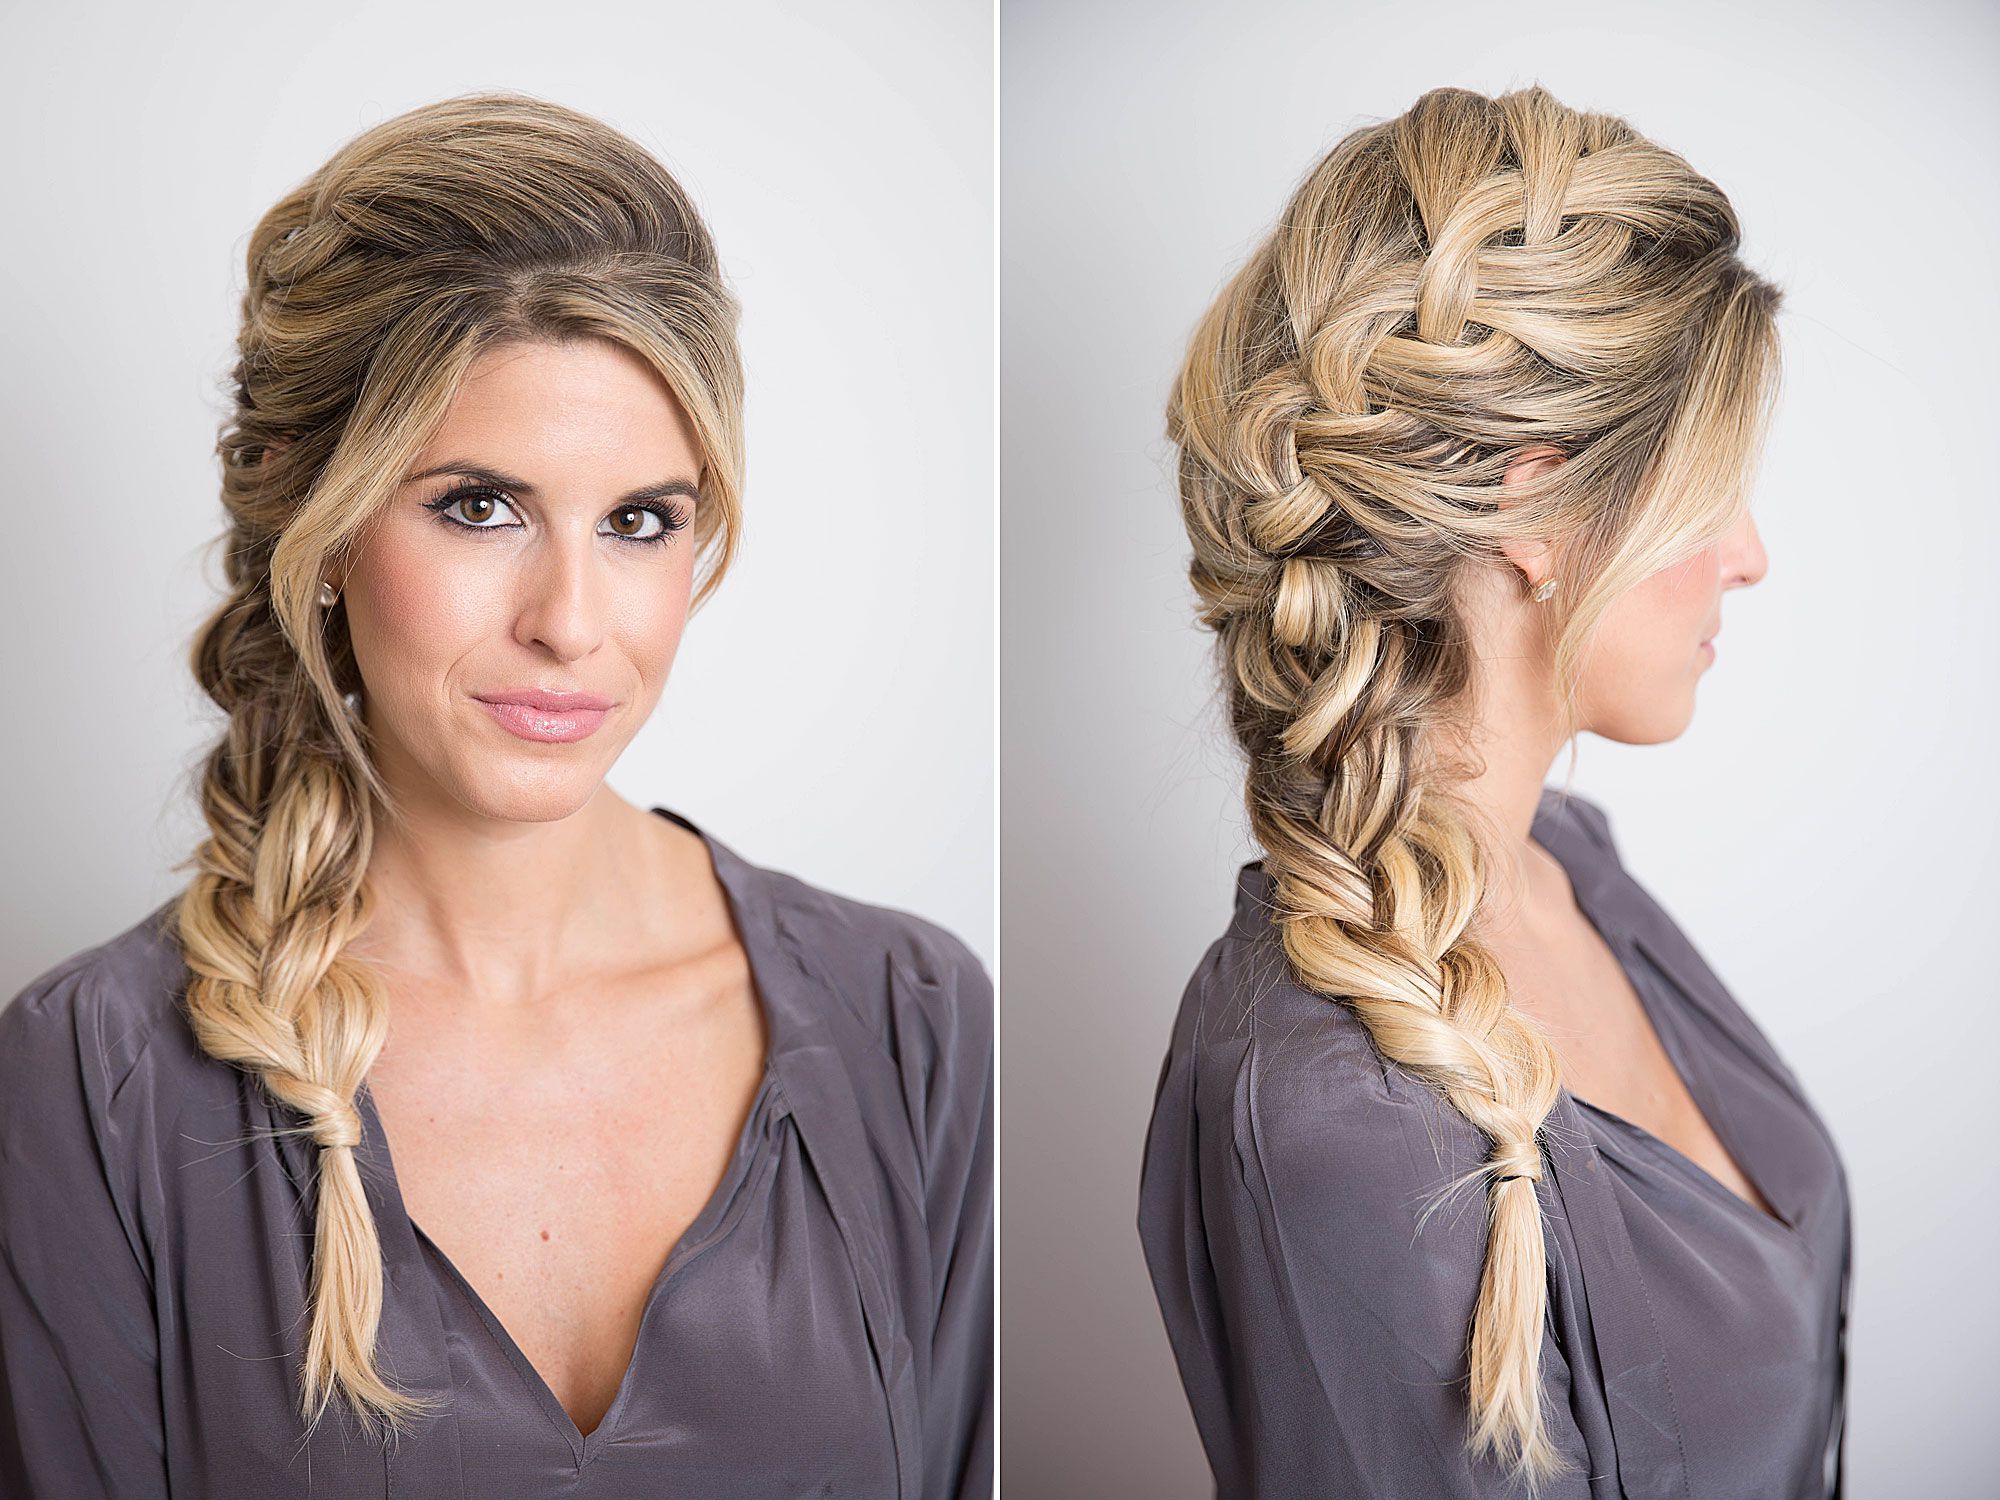 Newest Fancy Braided Hairstyles Intended For 17 Braided Hairstyles With Gifs – How To Do Every Type Of Braid (Gallery 3 of 20)